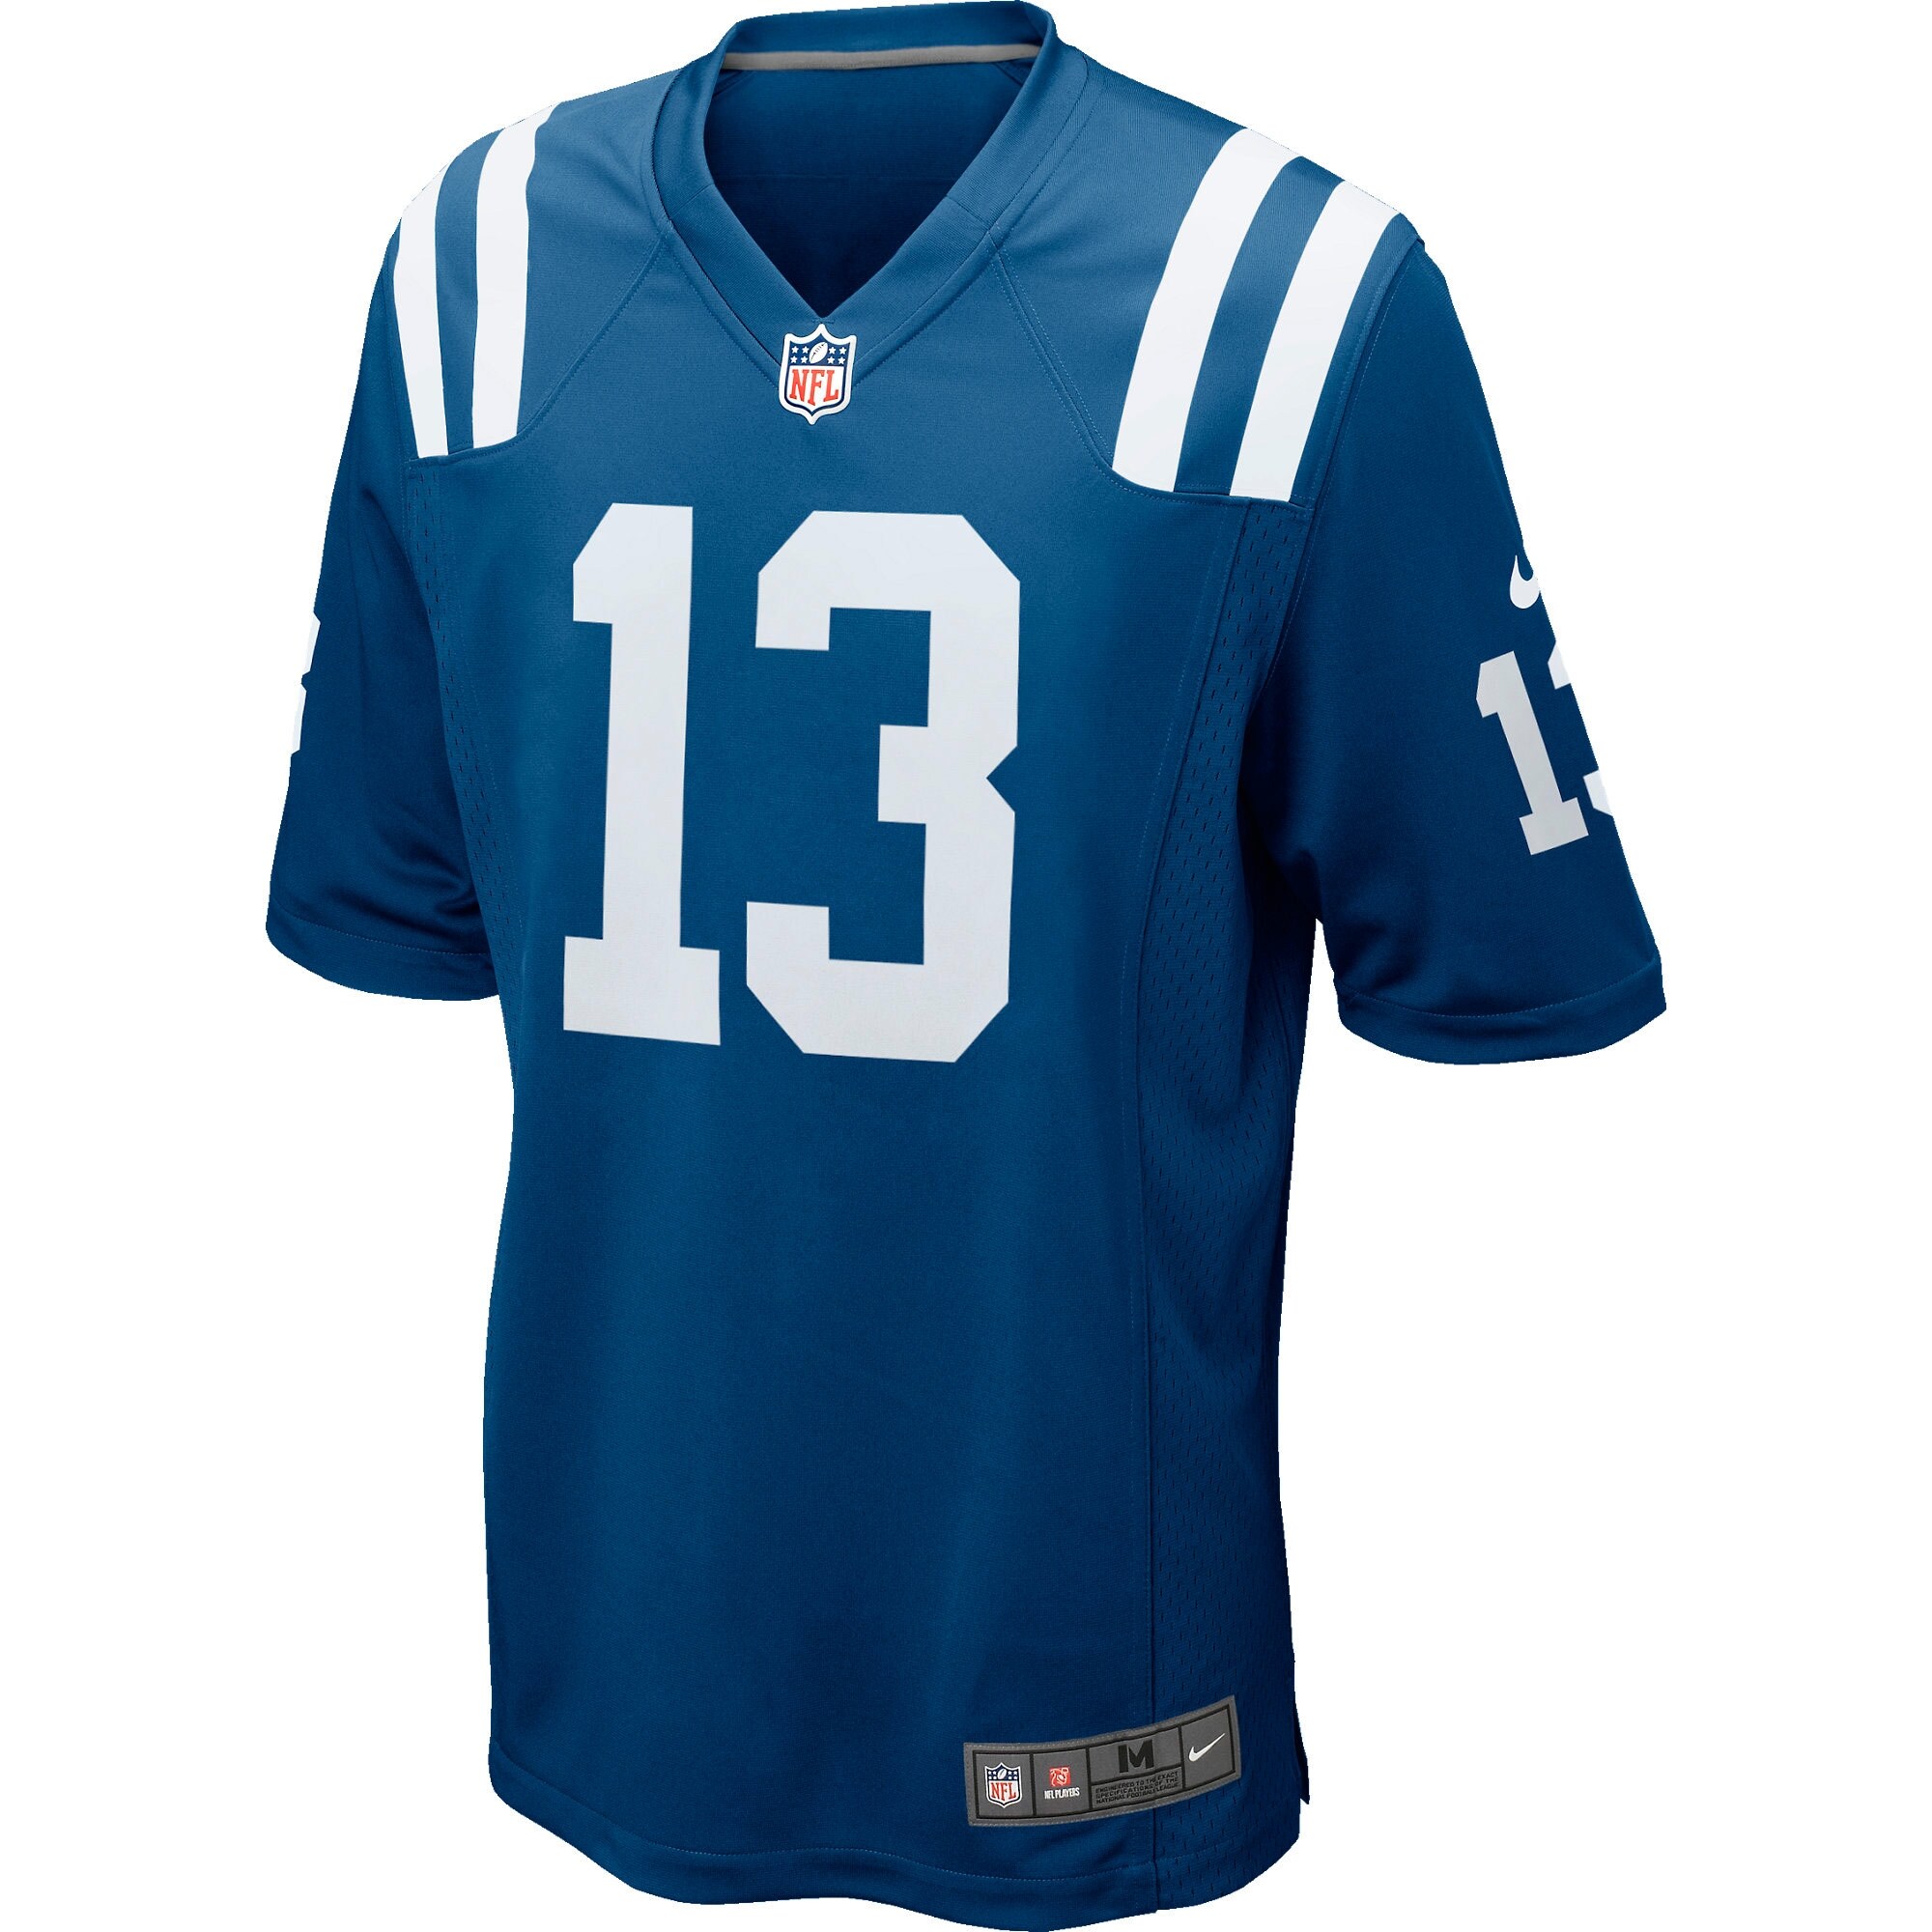 Men's Indianapolis Colts Jerseys Royal Blue T.Y. Hilton Game Style